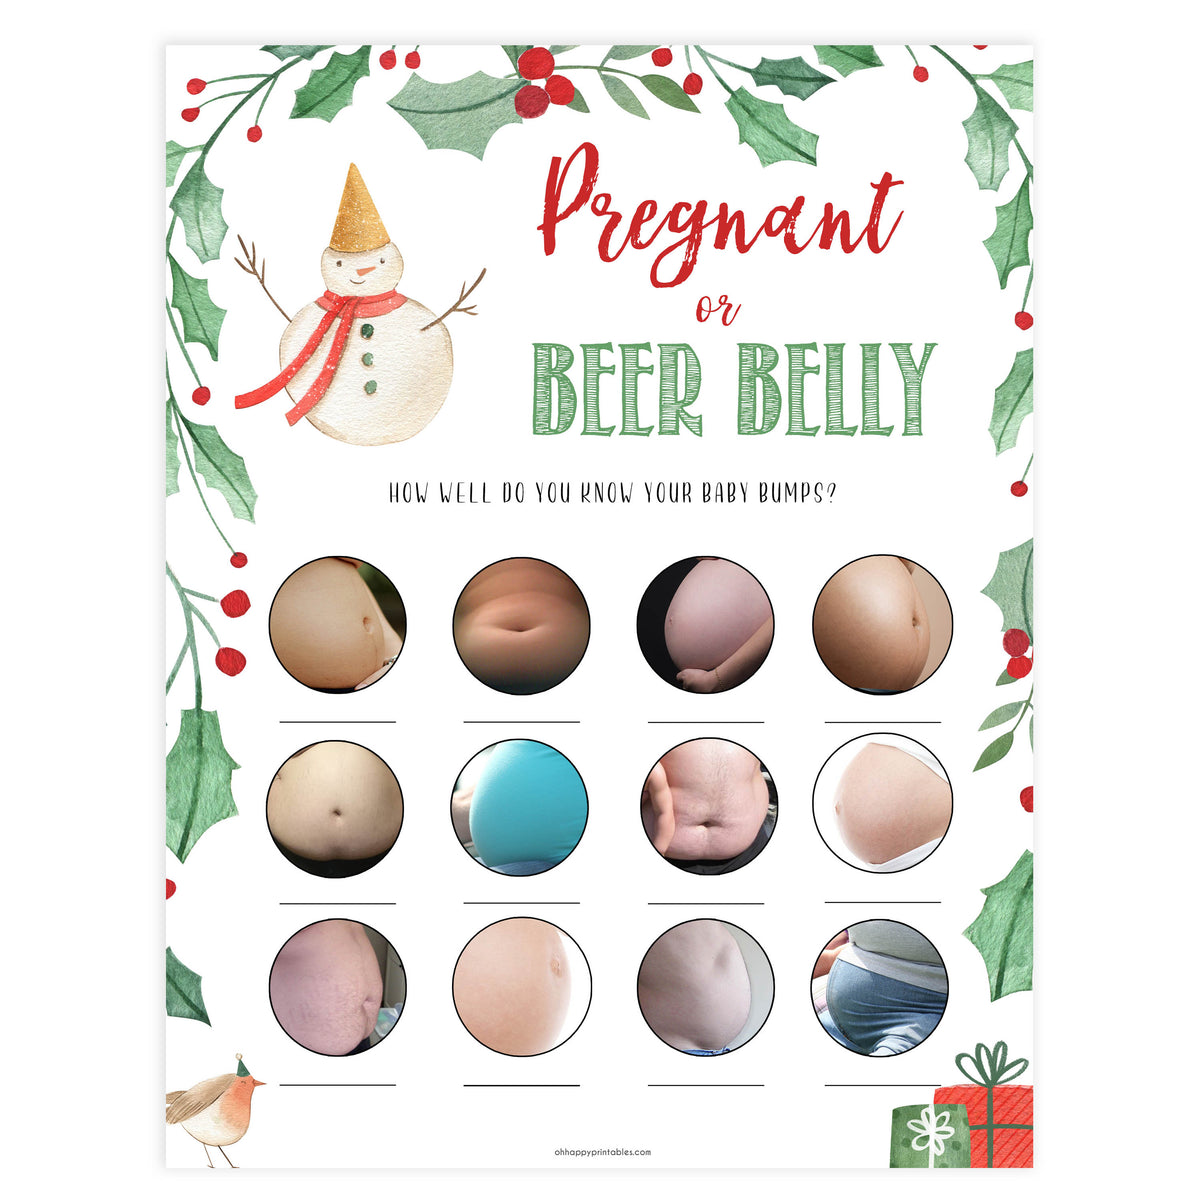 Christmas baby shower games, baby bump or beer belly festive baby shower games, best baby shower games, top 10 baby games, baby shower ideas, baby shower games